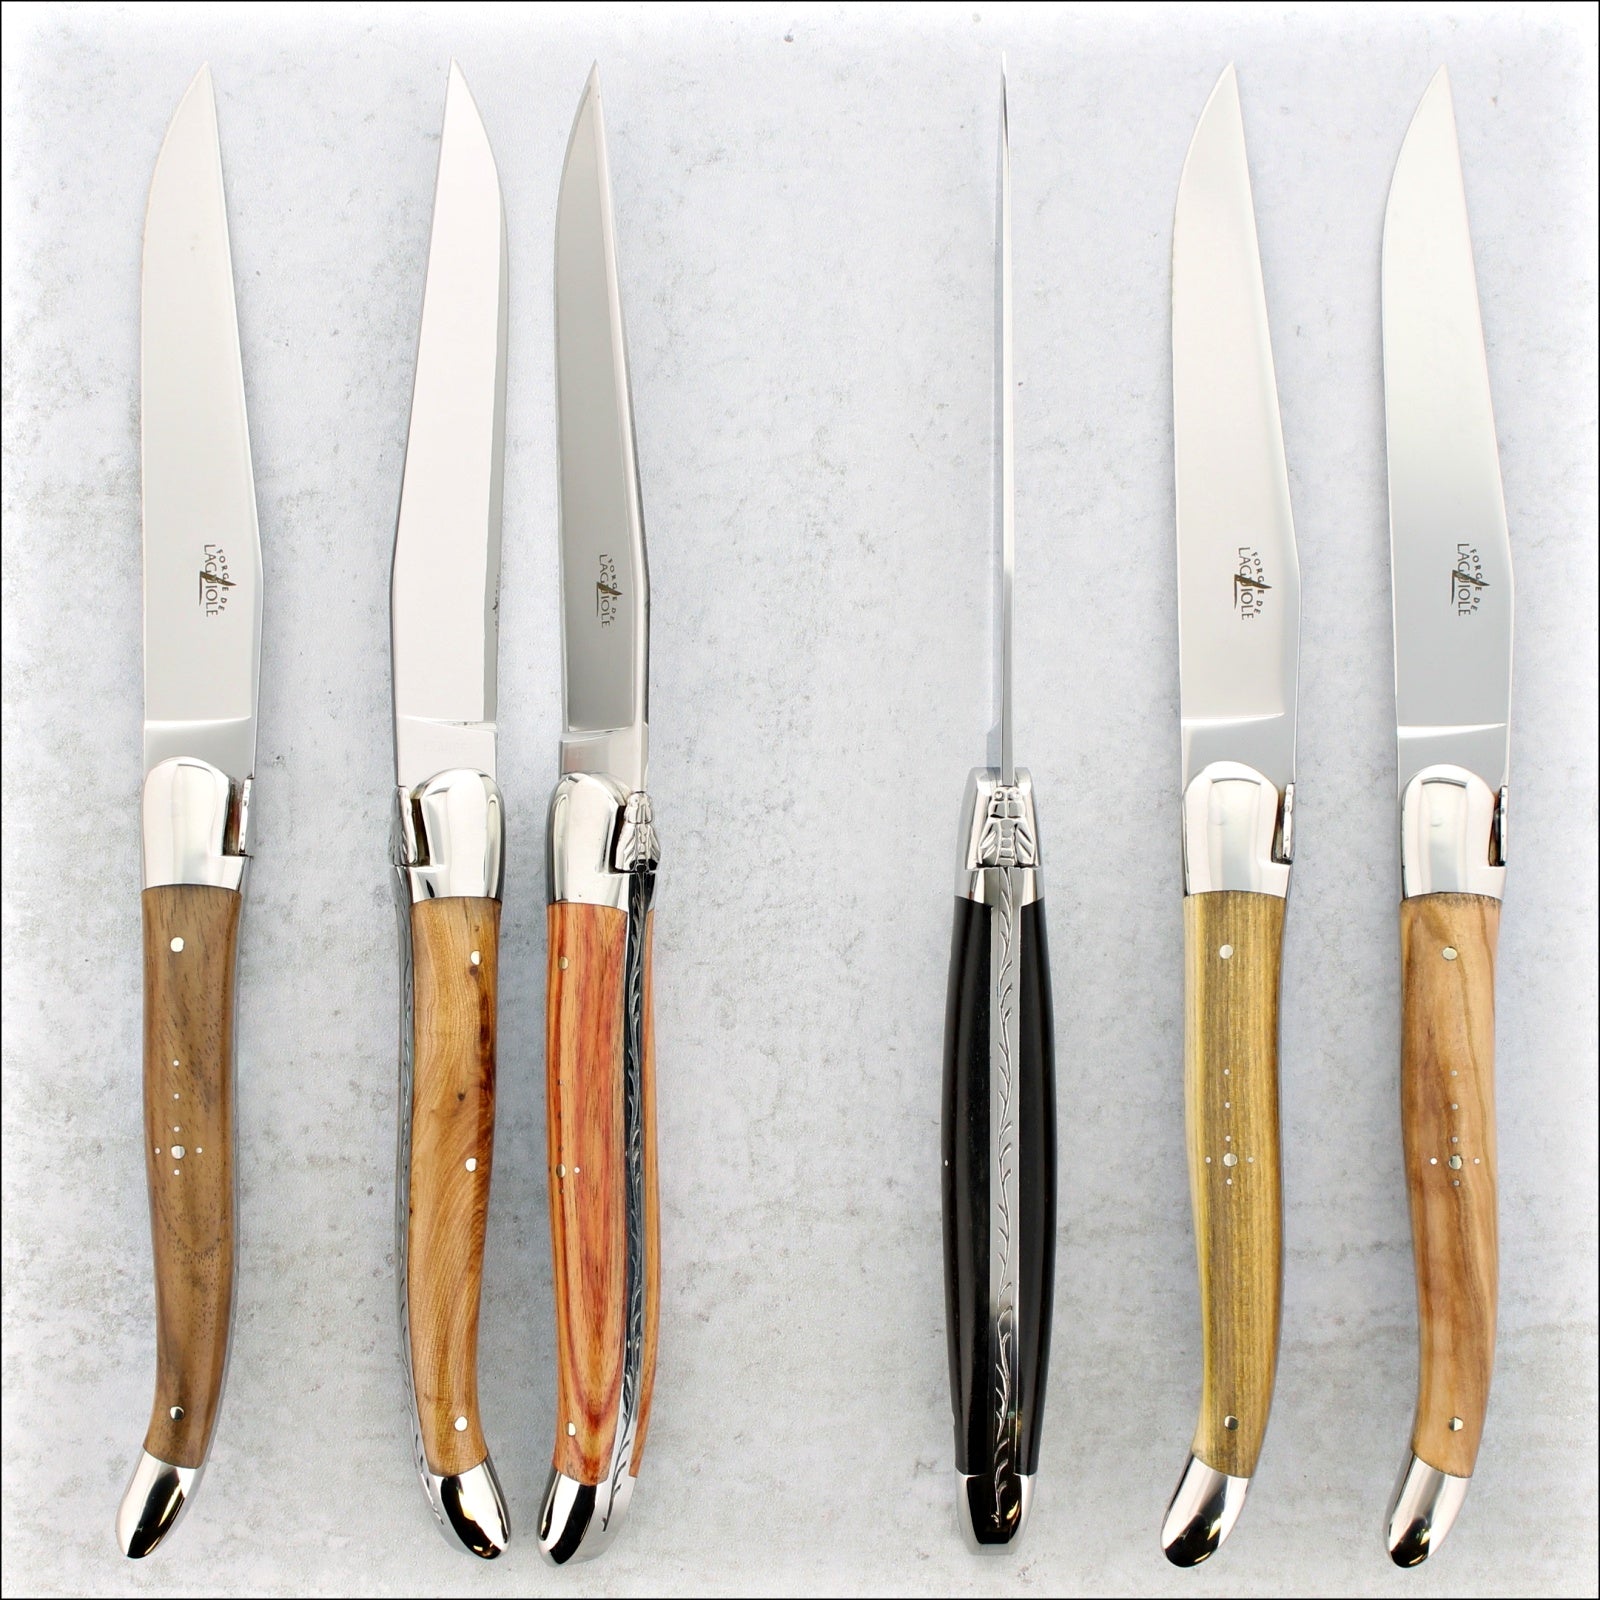 to view of a set of mixed handle laguiole steak knives